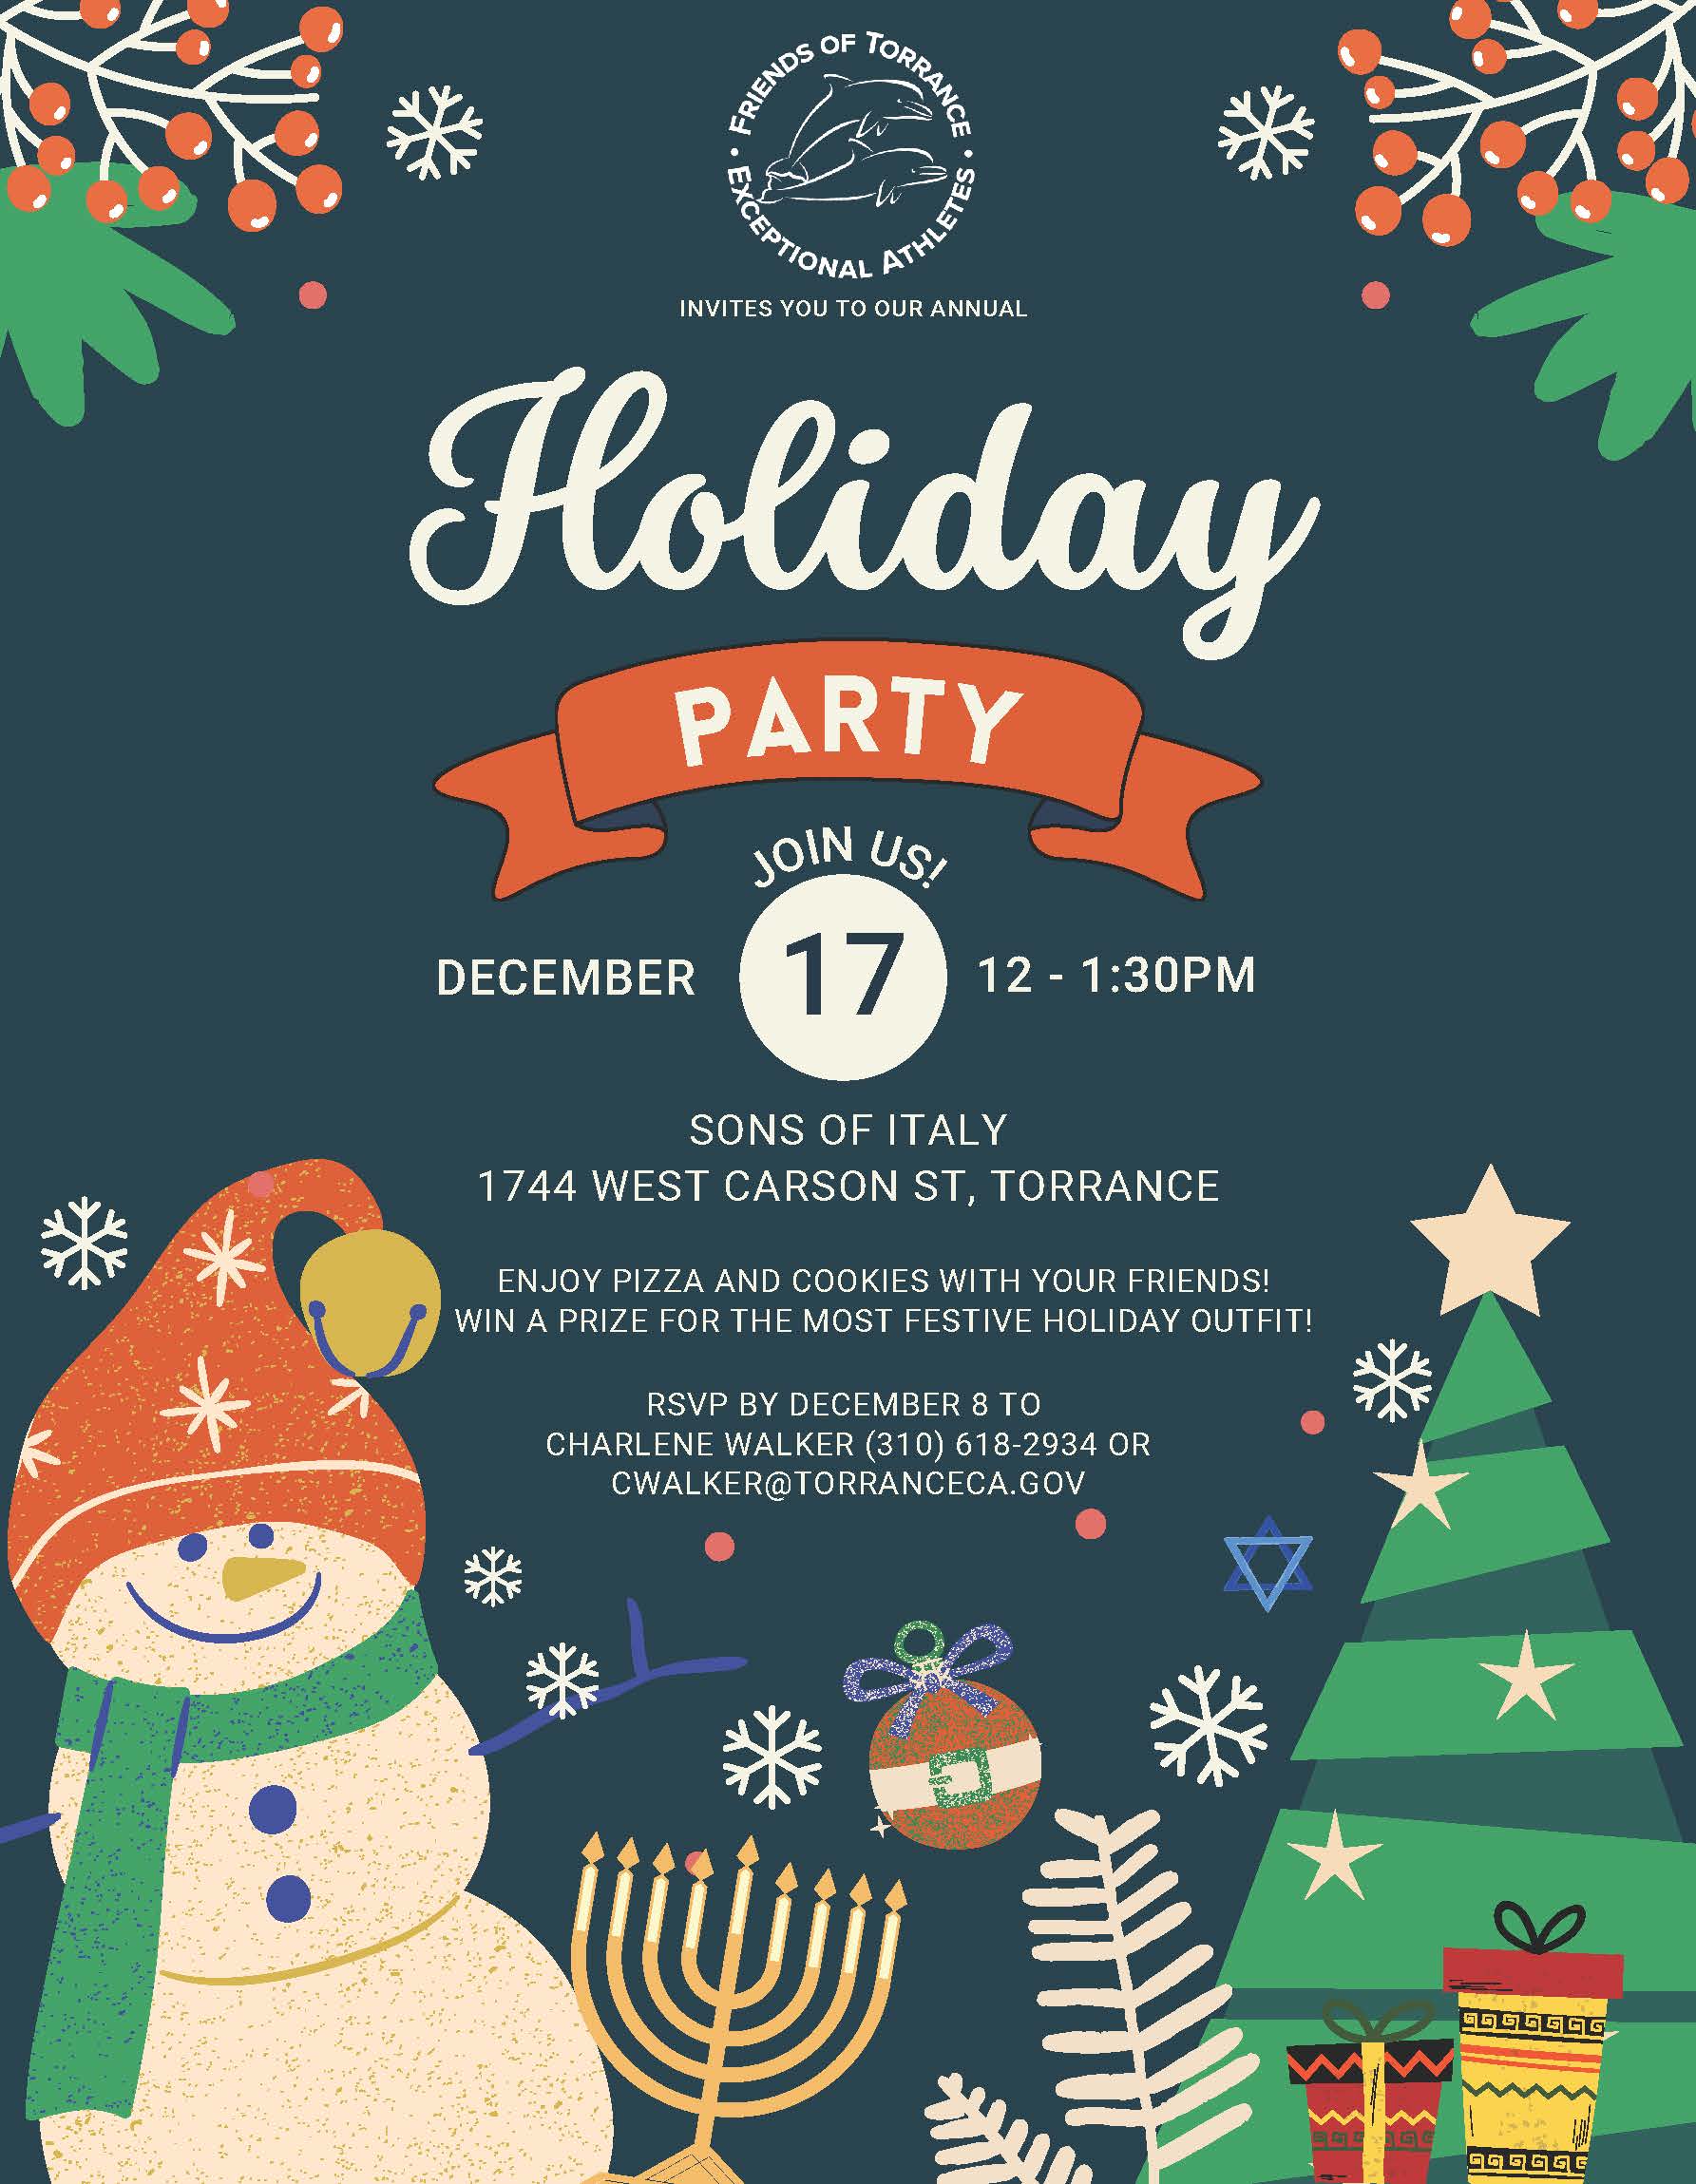 2023 FTEA Holiday Party Is One Month Away!